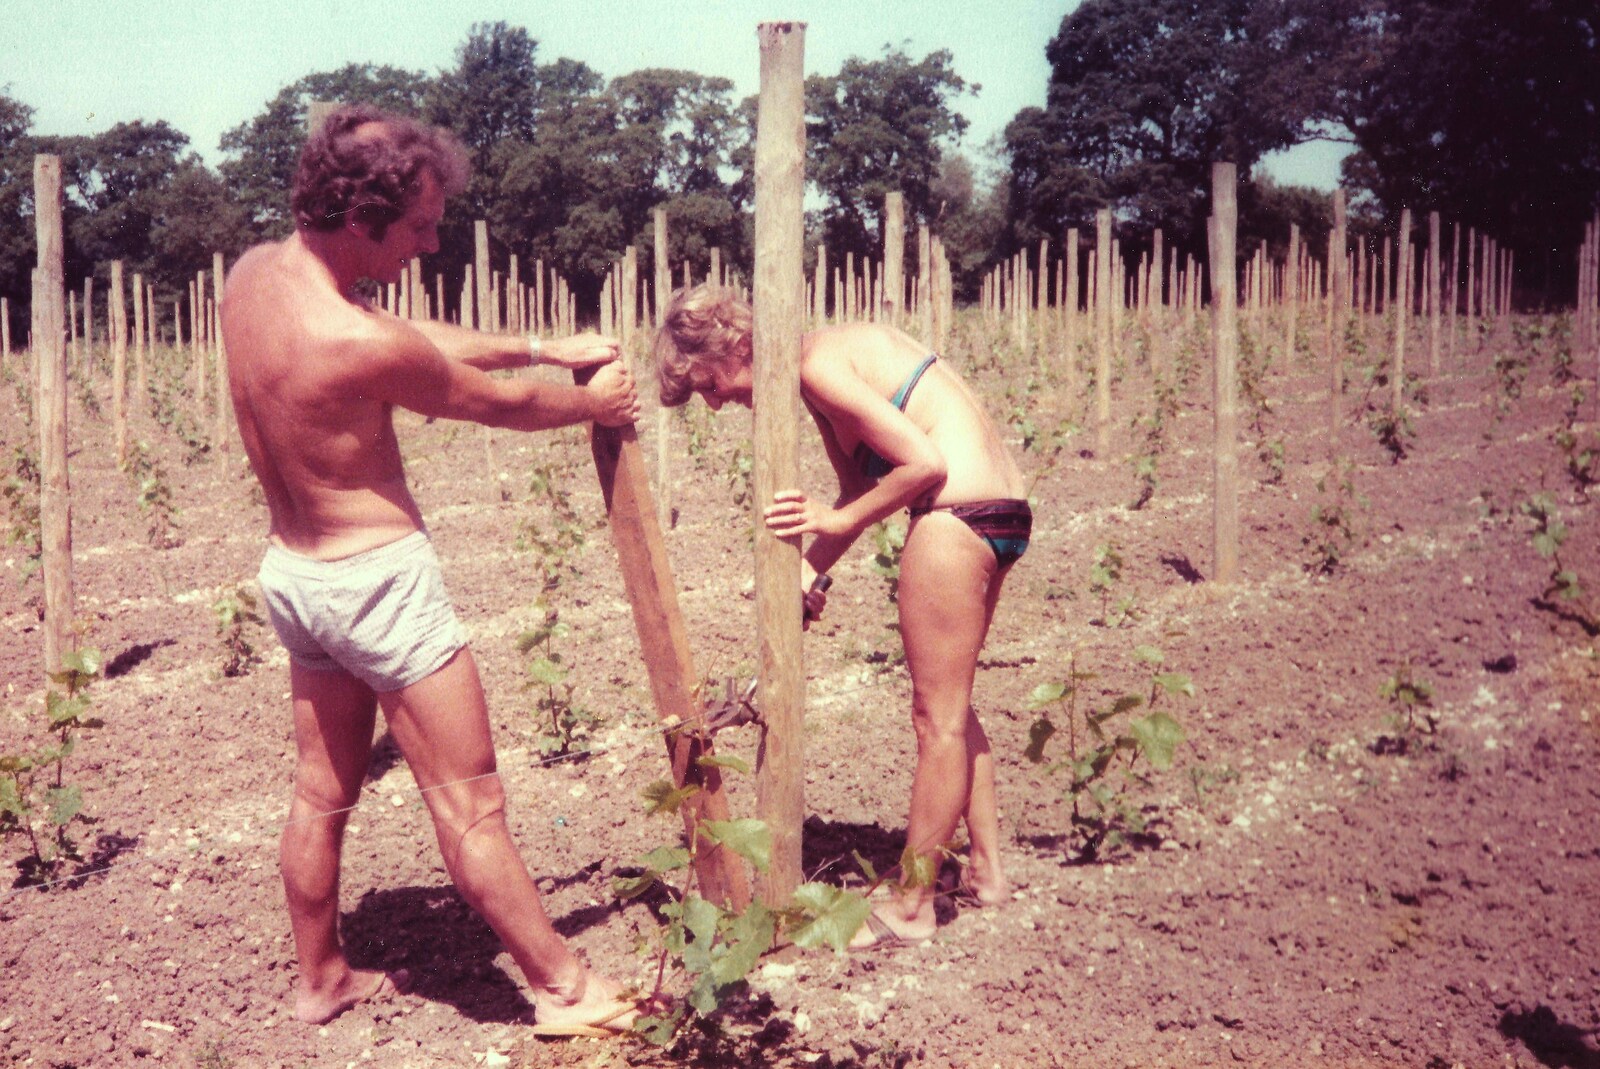 Mike stretches a guyot back from Constructing a Vineyard, Harrow Road, Bransgore, Dorset - 1st September 1981